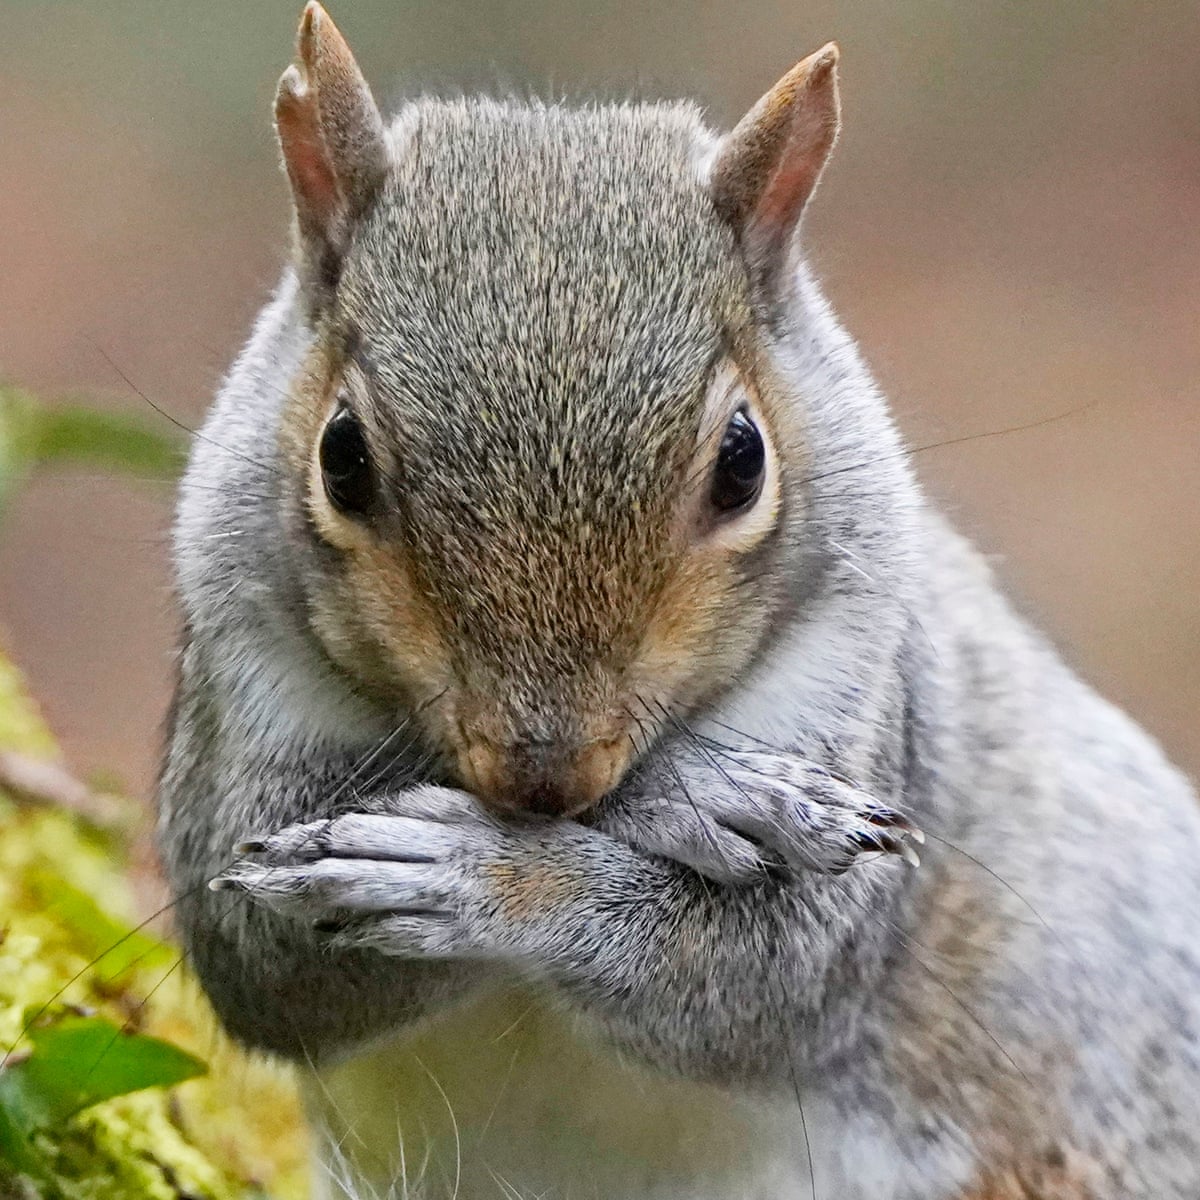 Oral contraceptives could help reduce grey squirrel numbers, research finds  | Invasive species | The Guardian